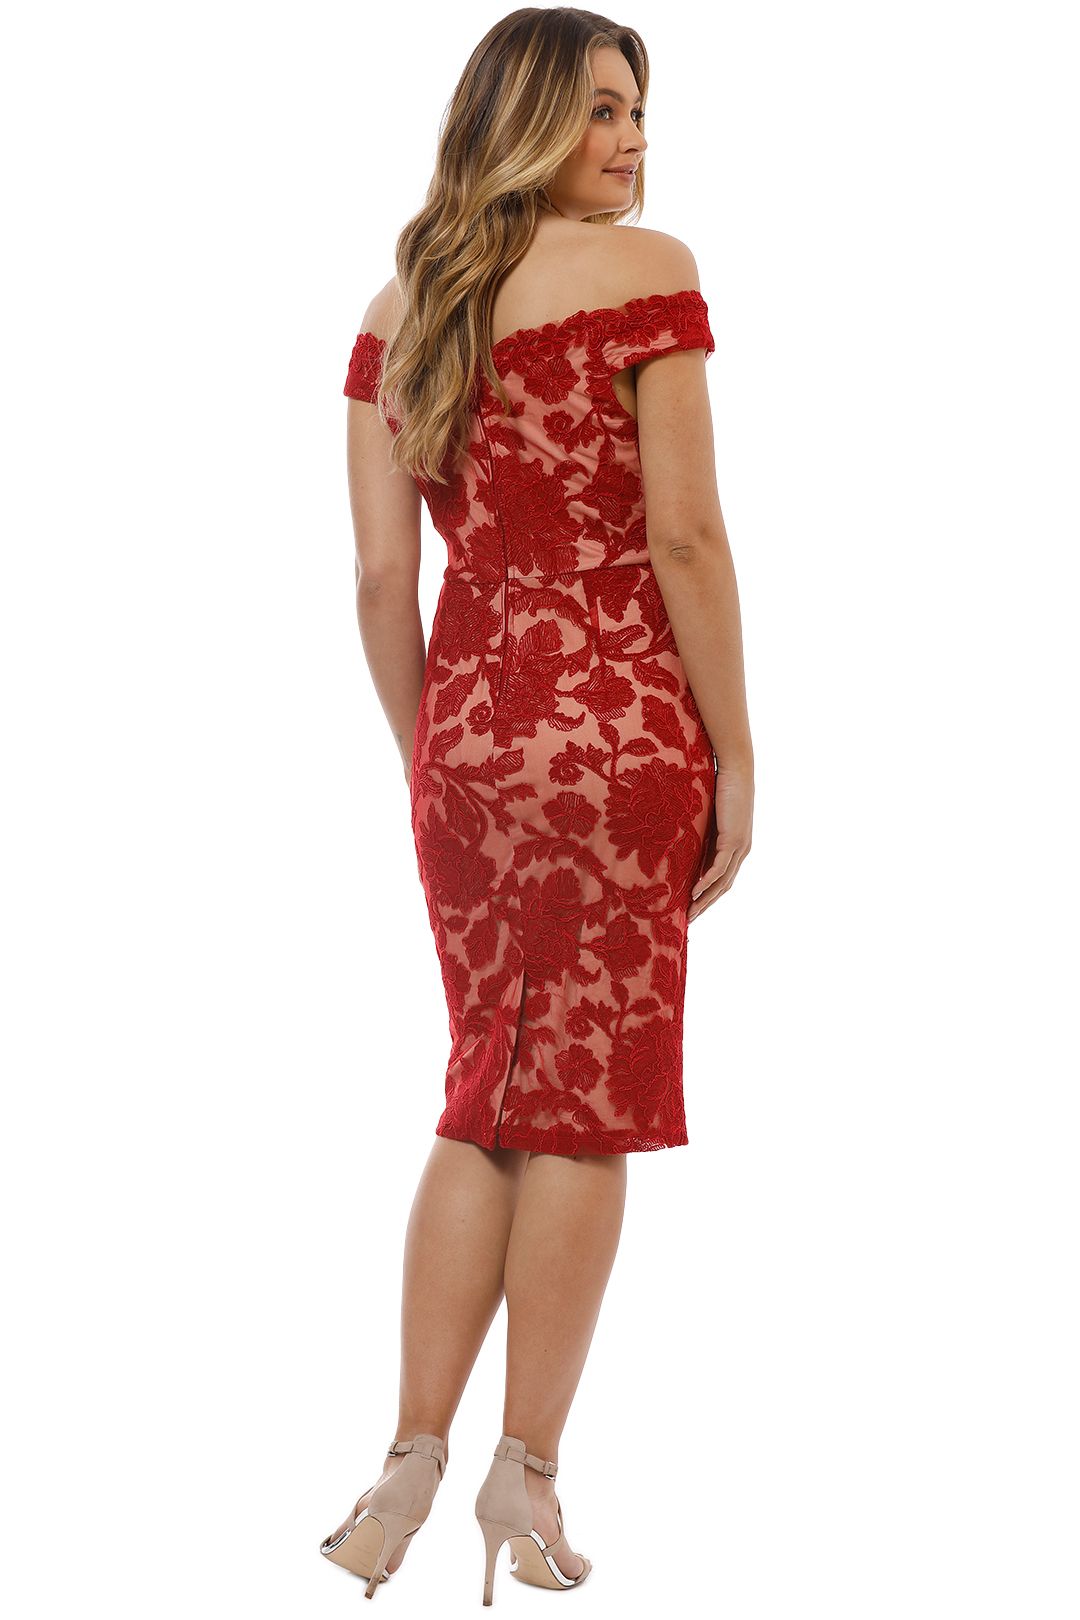 Montique - Christiana Lace Dress - Red - Back